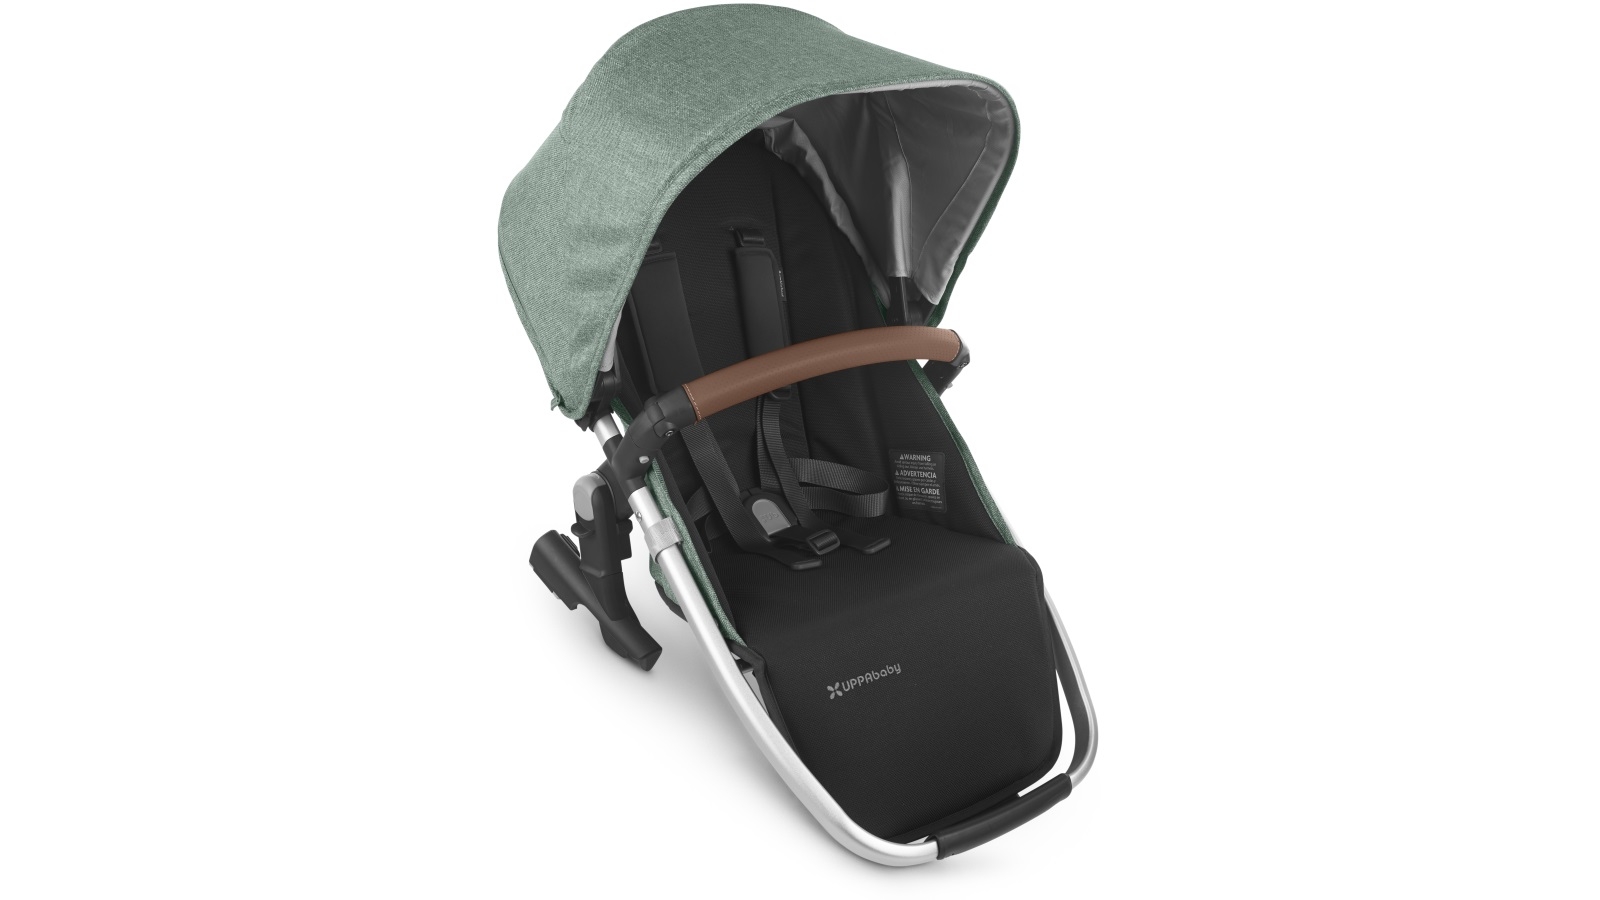 cheapest place to buy uppababy vista